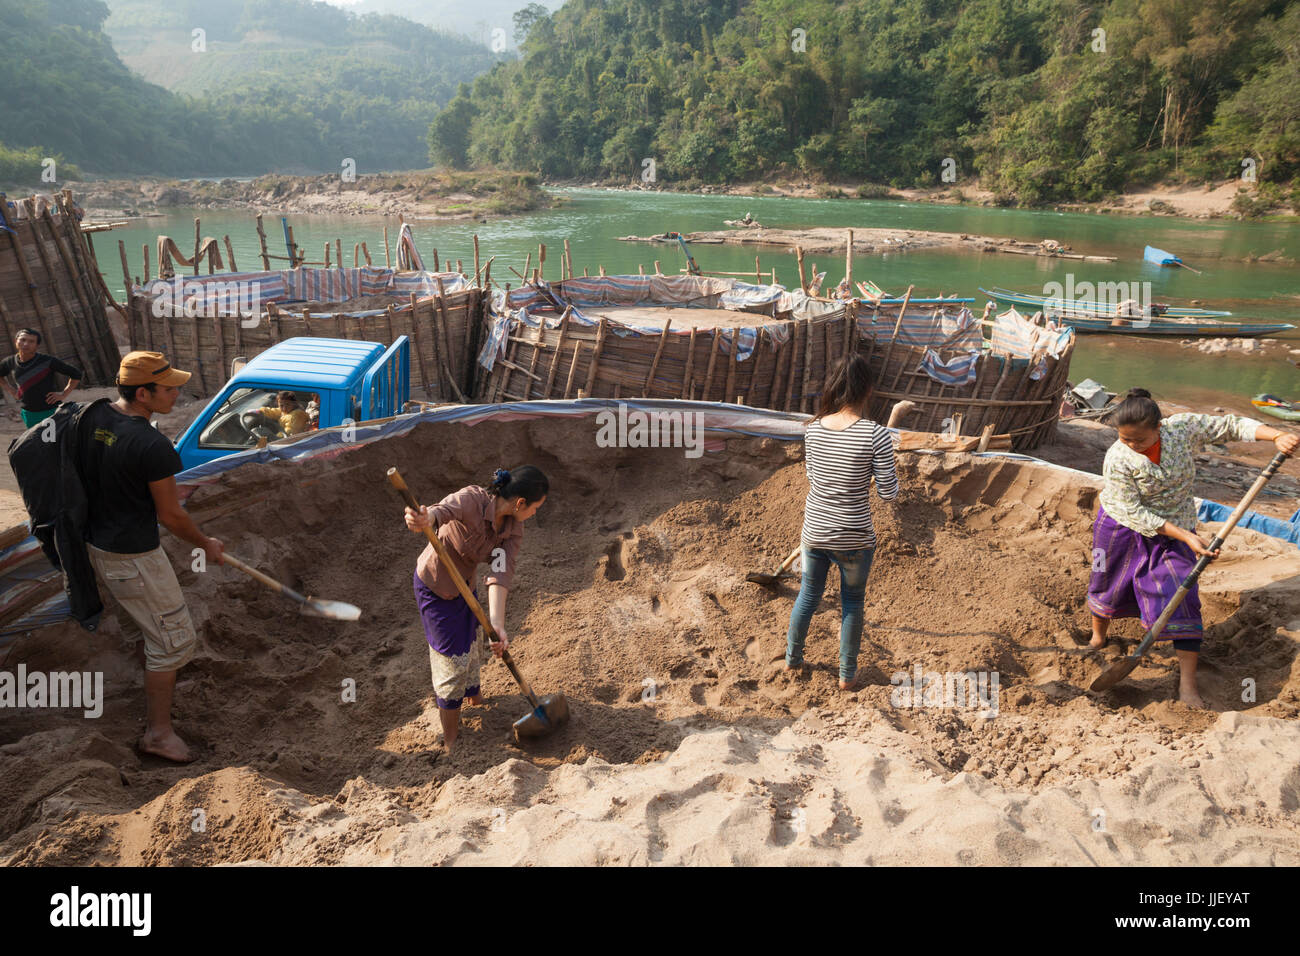 Loa men and women, working for SinoHydro, shovel sand on the shore of the Nam Ou River in Hat Sa, Laos. The sand is for making concrete used in the construction of Dam #6 being built upstream. Stock Photo